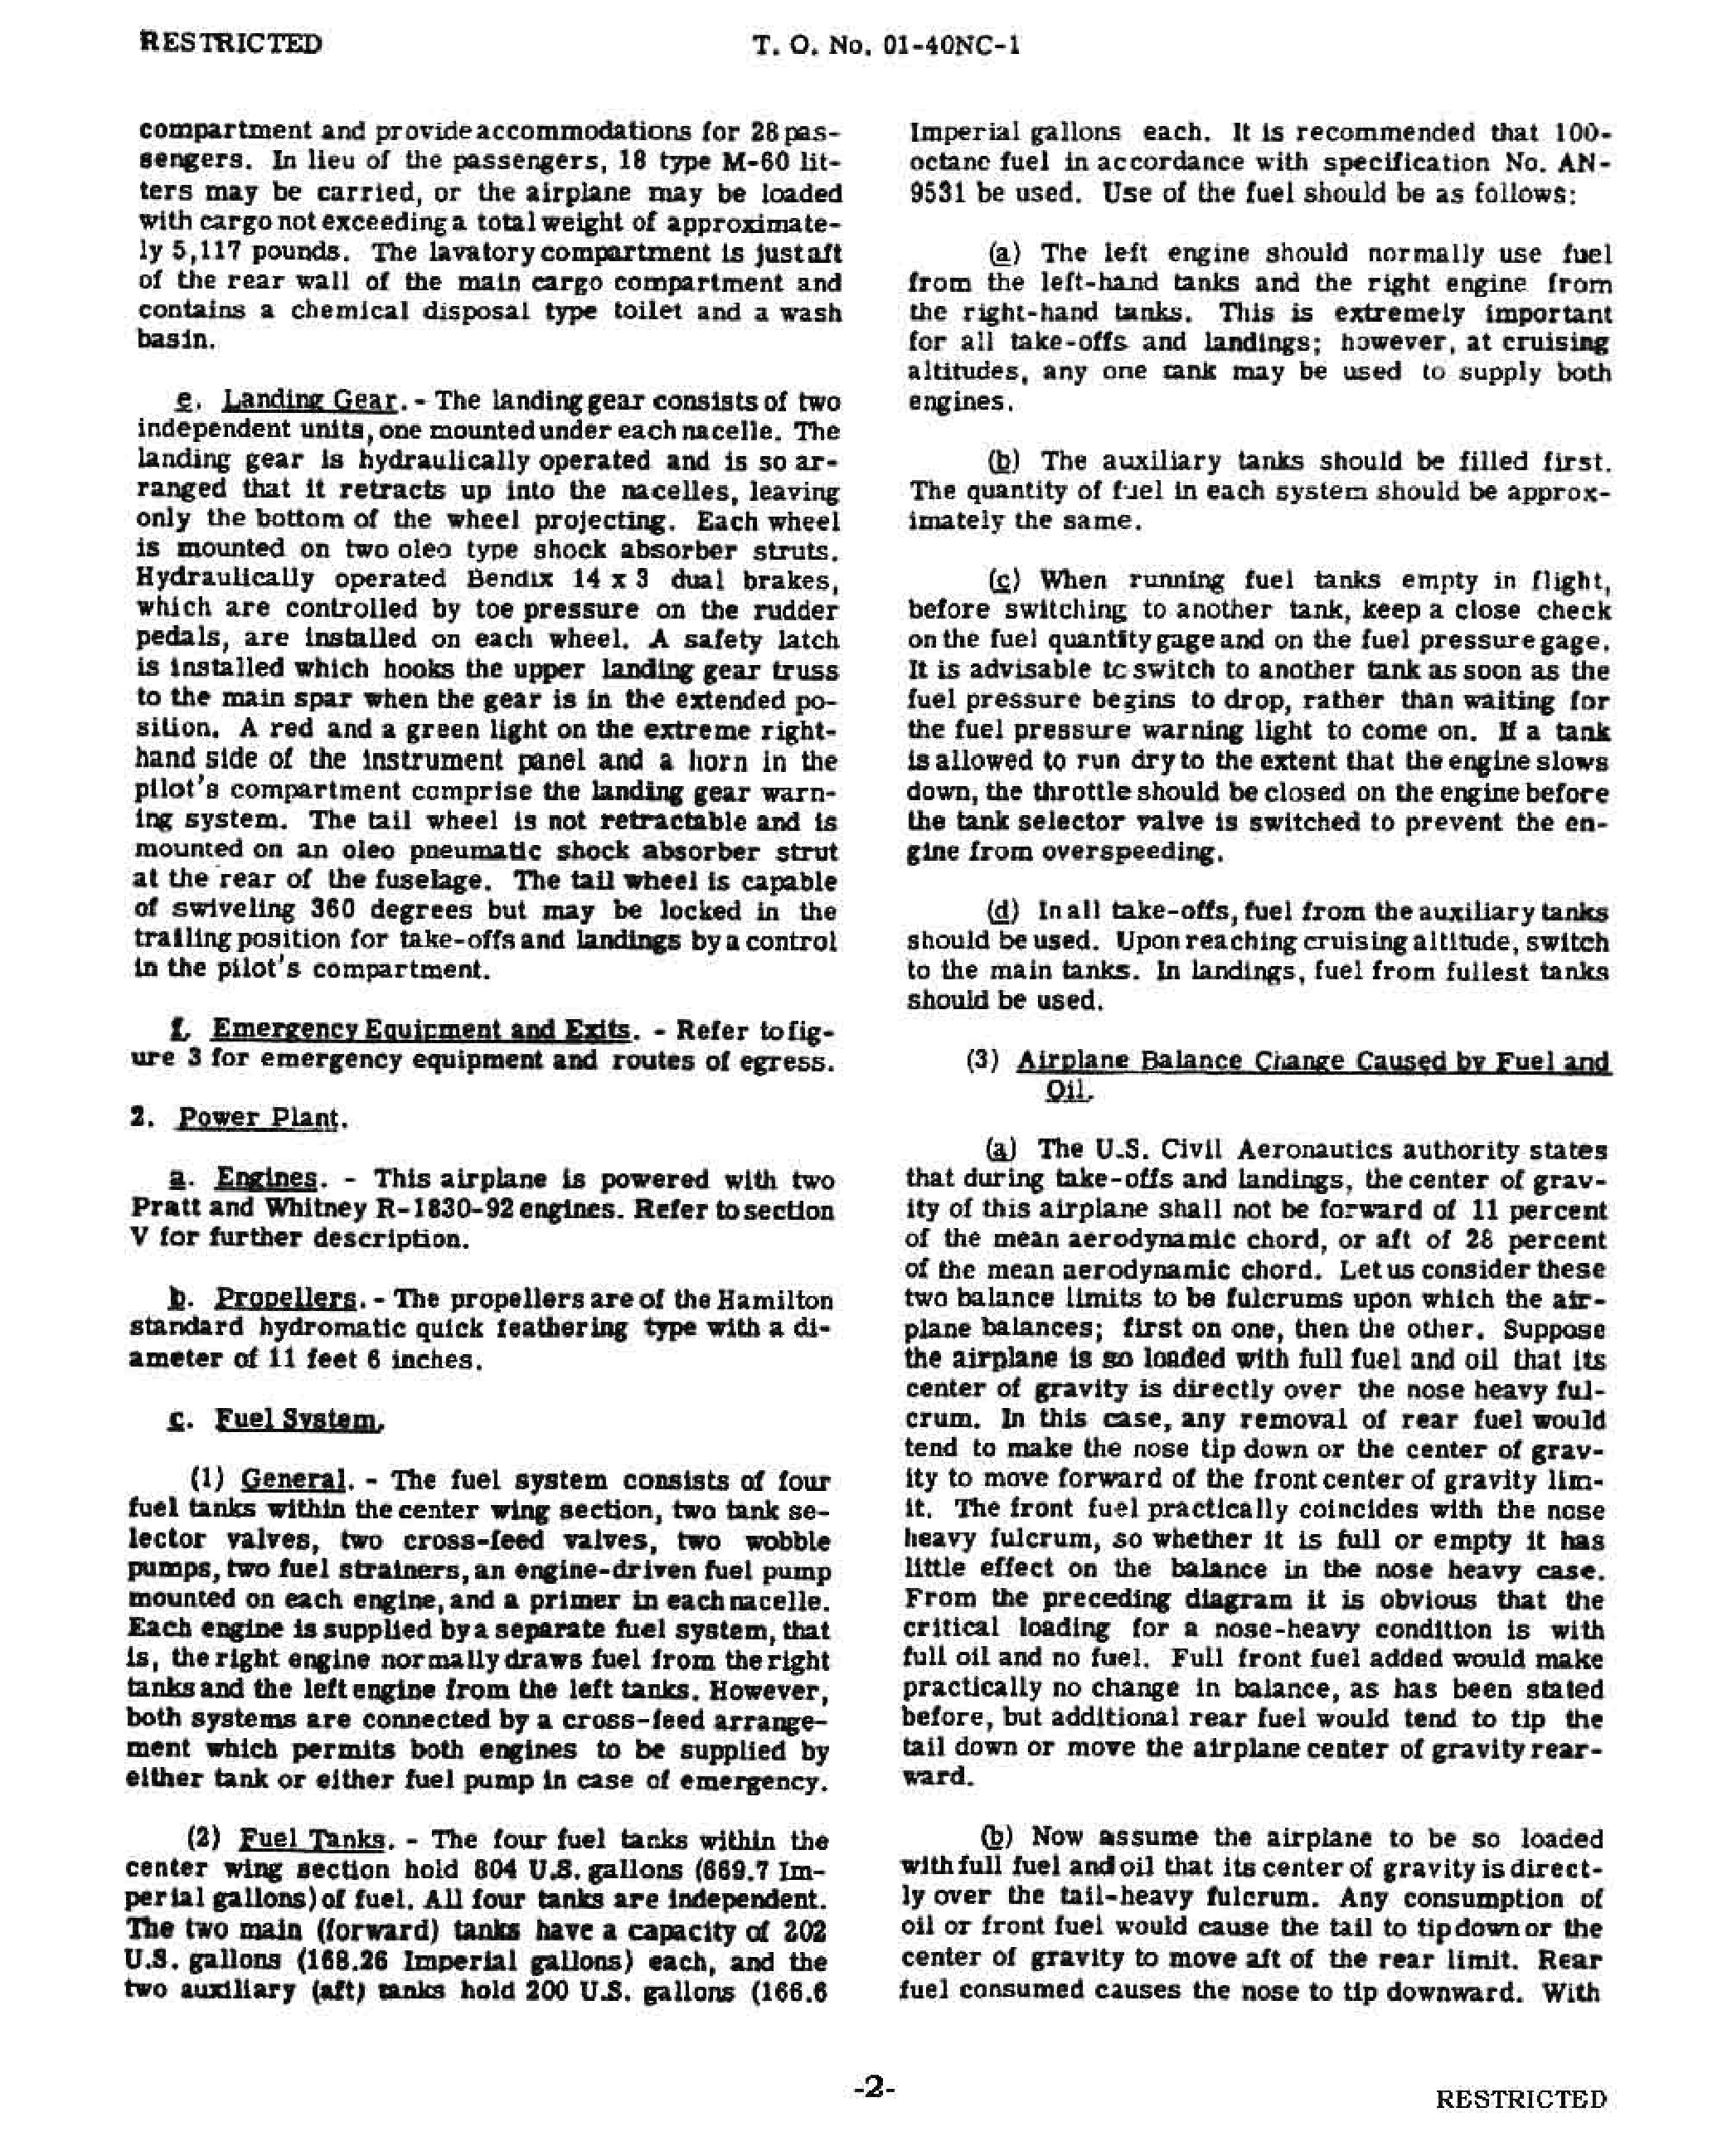 Sample page 6 from AirCorps Library document: Pilot's Flight Operating Instructions for C-47 Airplane